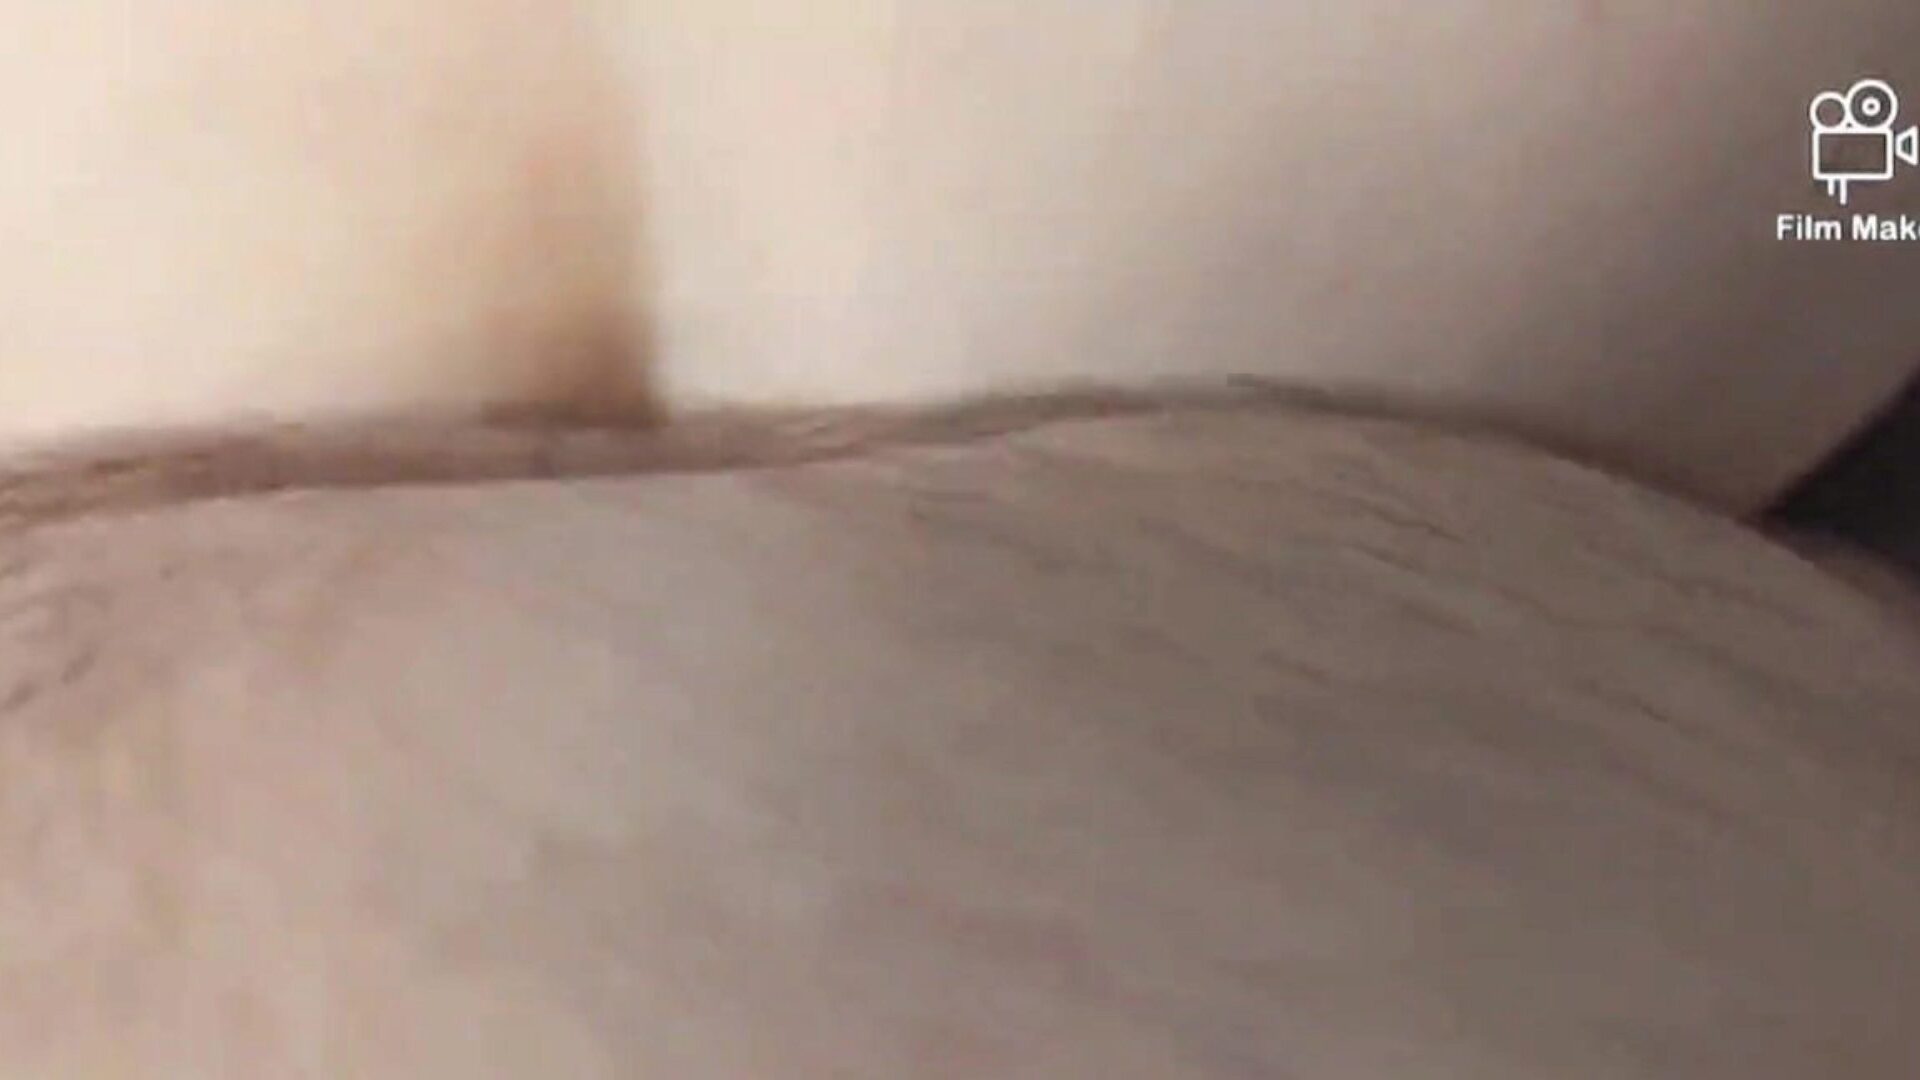 MILF BBW Cumshots 1: Free Xxx Free mother I'd like to fuck HD Porn Video 81 Watch MILF BBW Cumshots 1 tube hook-up movie scene for free-for-all on xHamster, with the imperious bevy of British Xxx Free mother I'd like to fuck & big beautiful woman Mobile Tube HD porn movie sequences